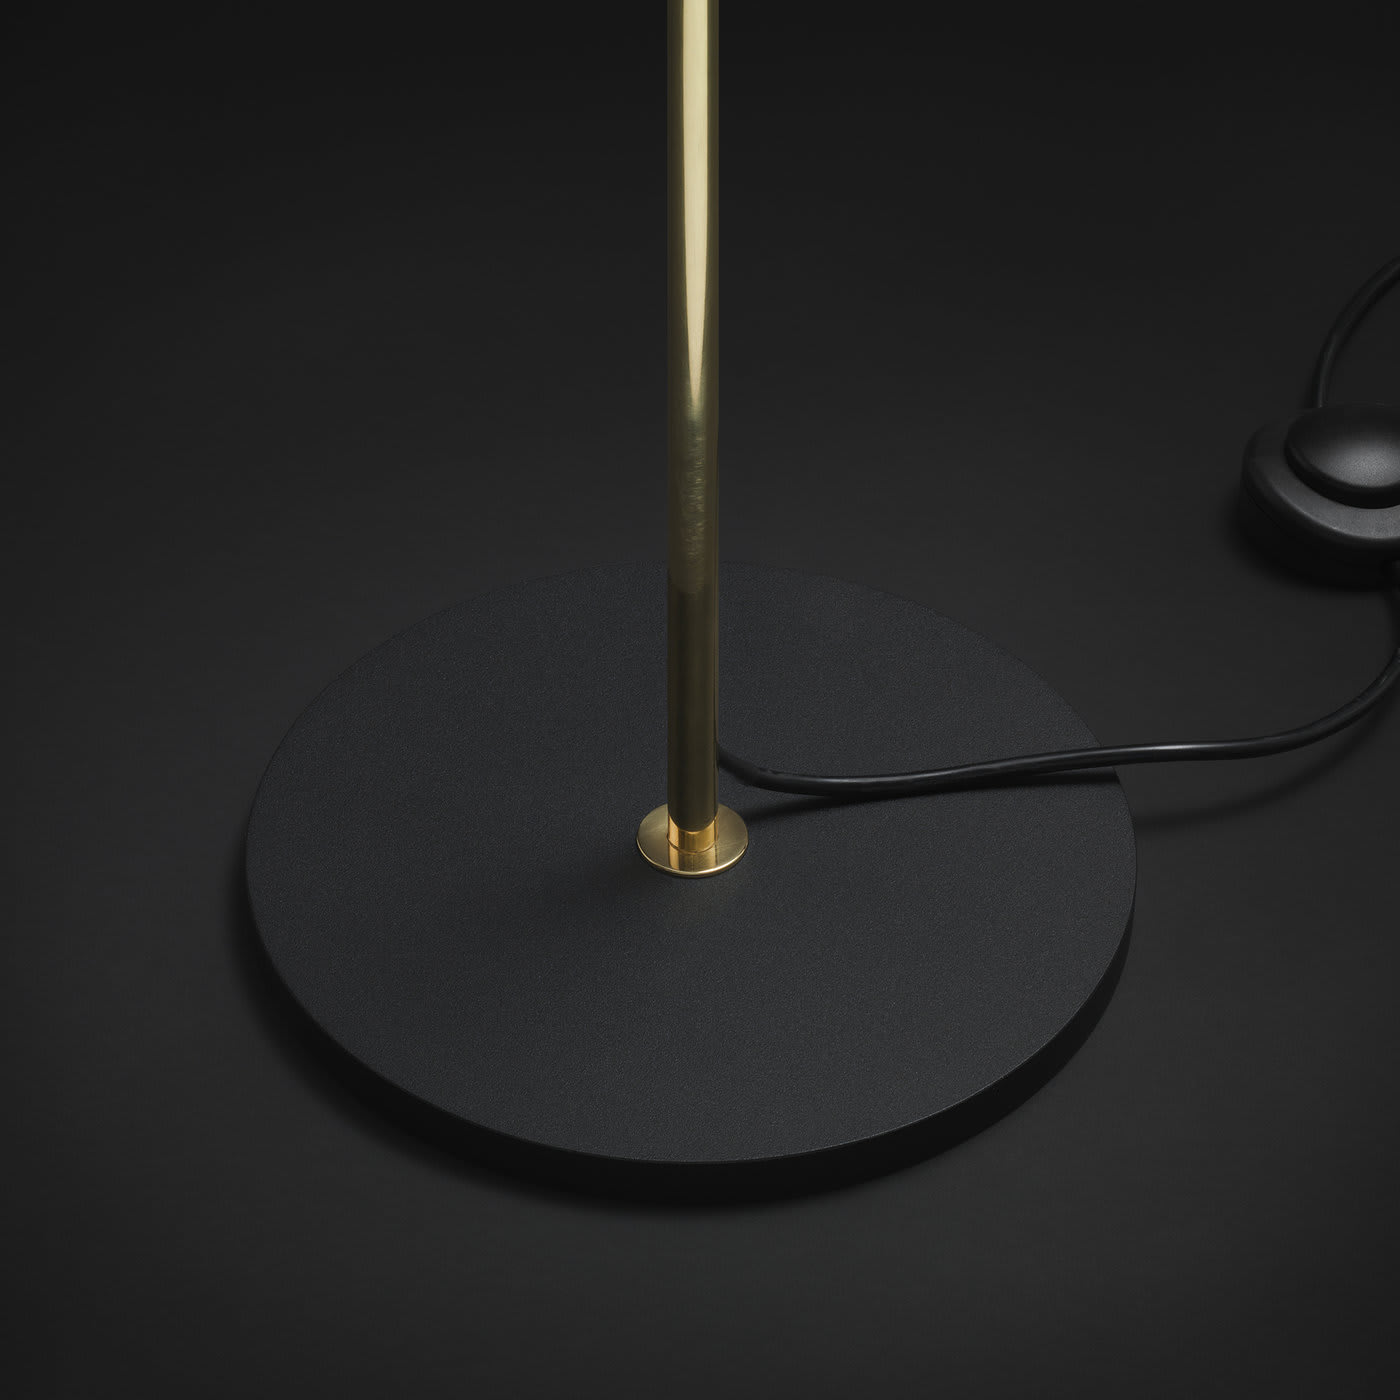 Lady V Black and White Tall Floor Lamp in Brass - Tato